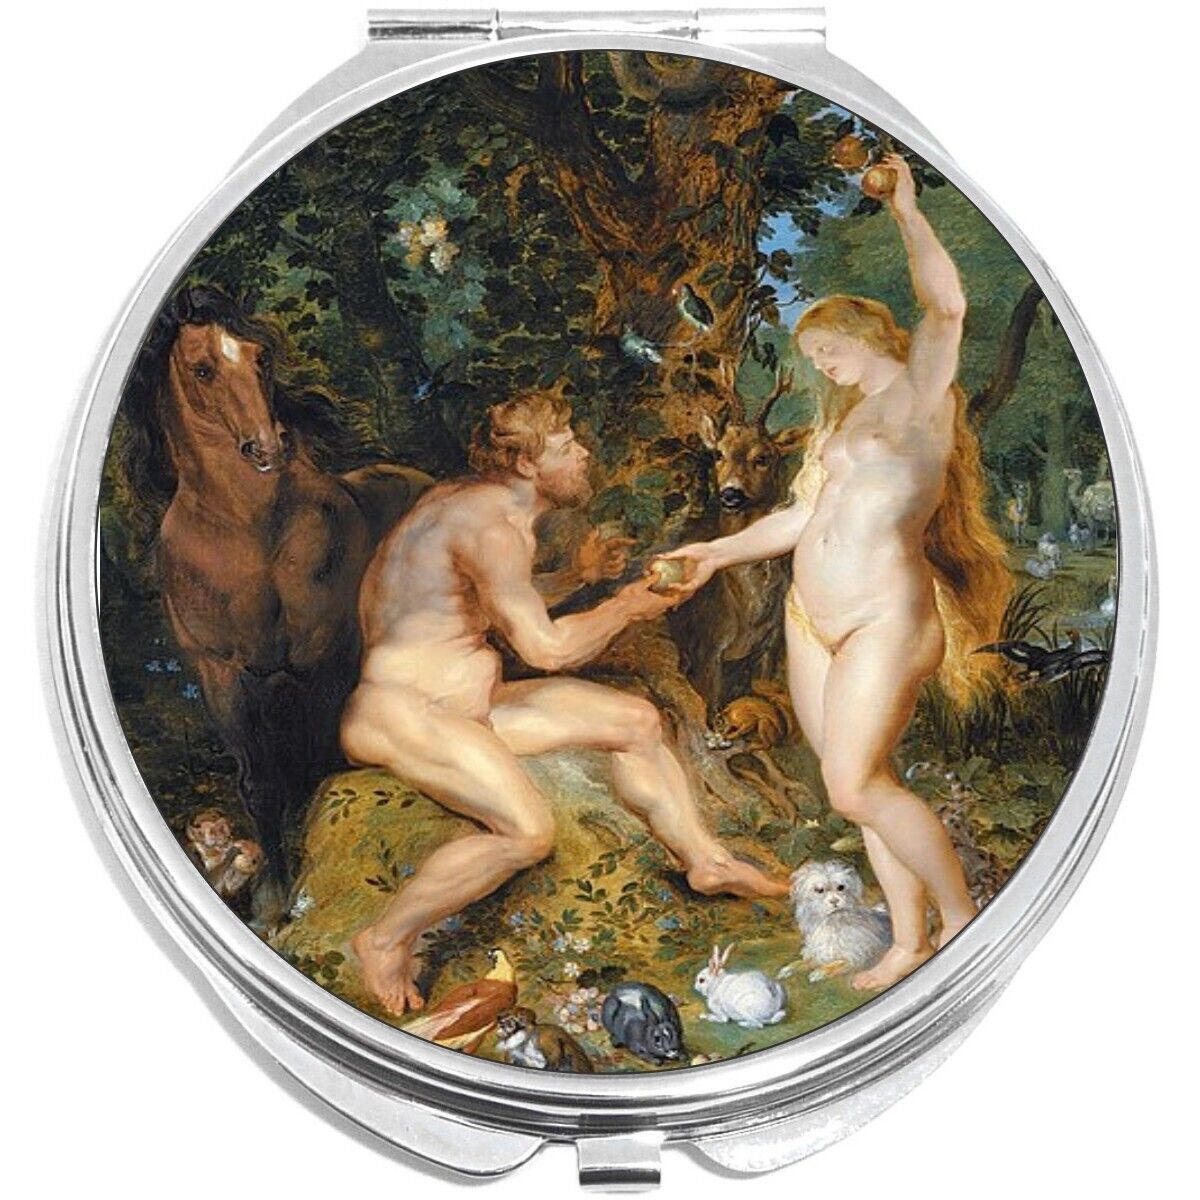 Garden of Eden Fall of Man Compact with Mirrors - for Pocket or Purse - $11.76